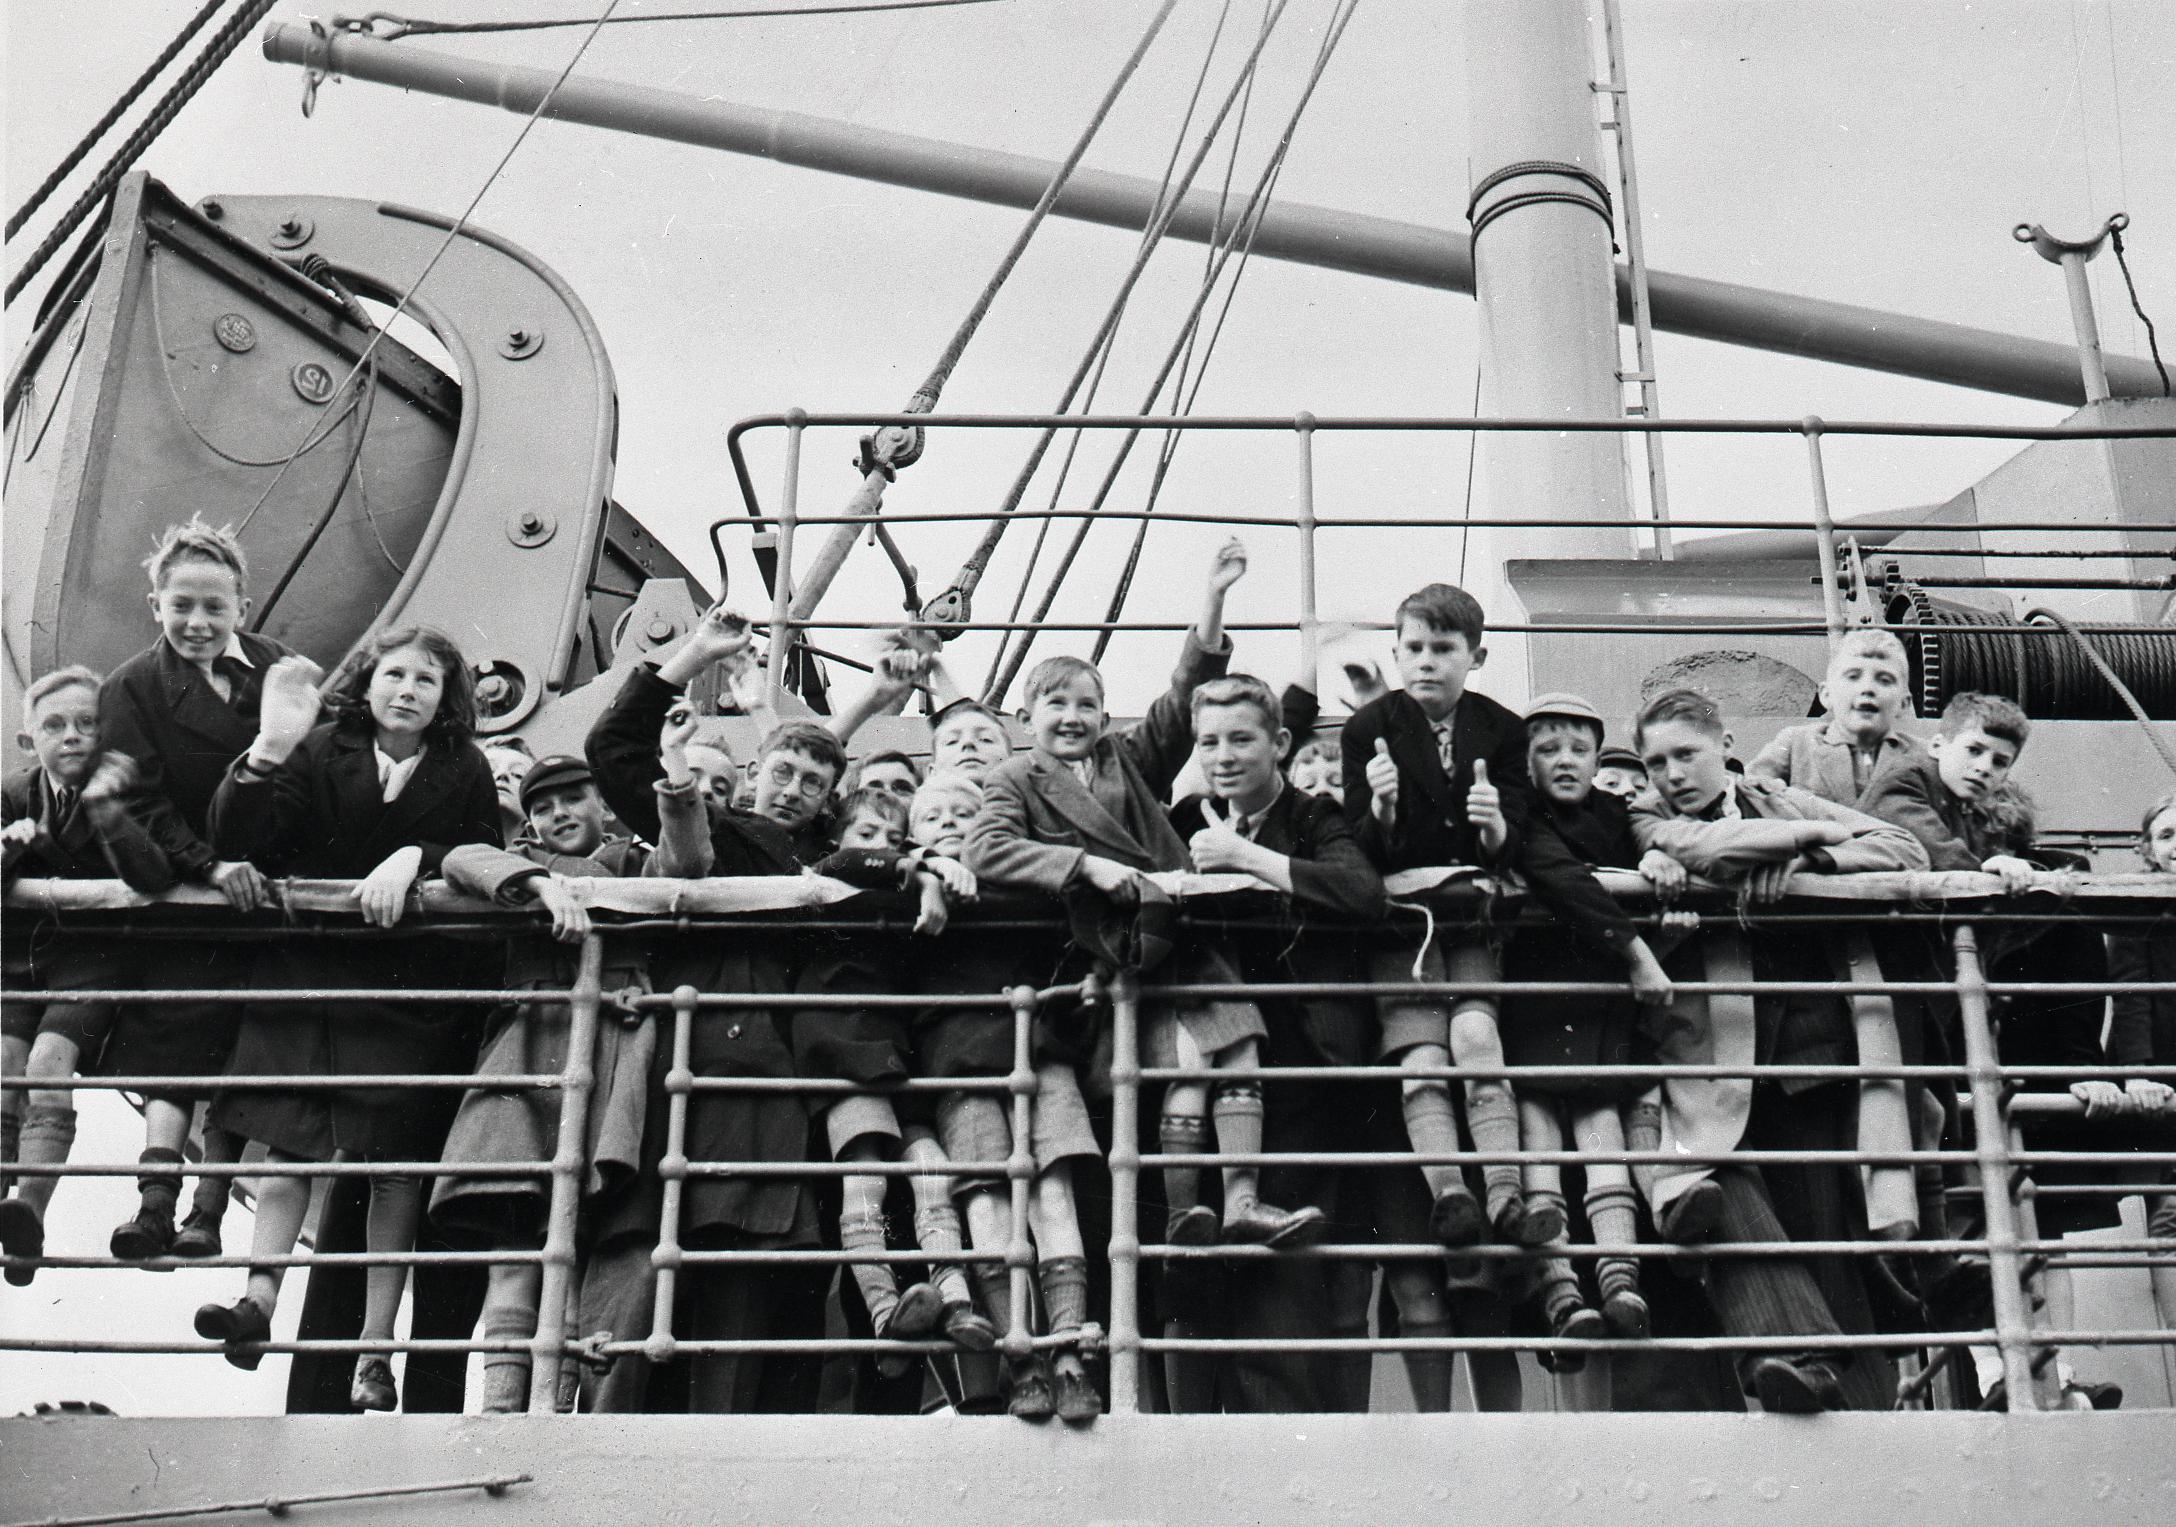 Monochrome photograph of a group of children waving and making thumbs up from the rail of a ship.